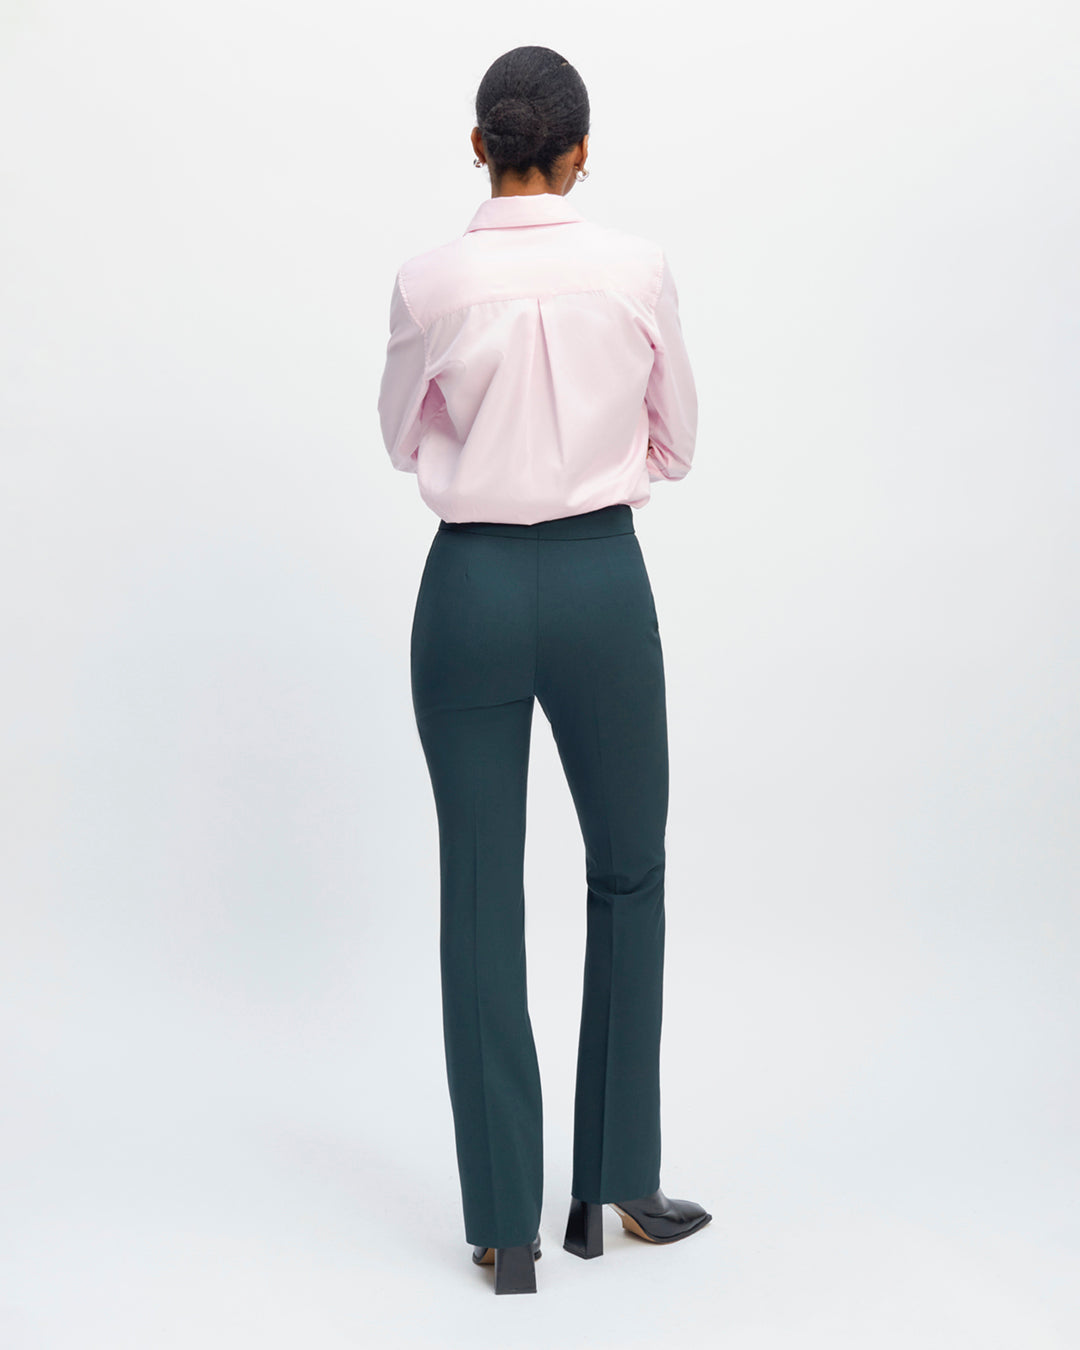 Trouser-tailor-green-High-waist-Cut-flair-vented-at-ankles-Decoration-buttons-covered-asymmetrical-Zipper-side-17H10-tailors-for-women-paris-